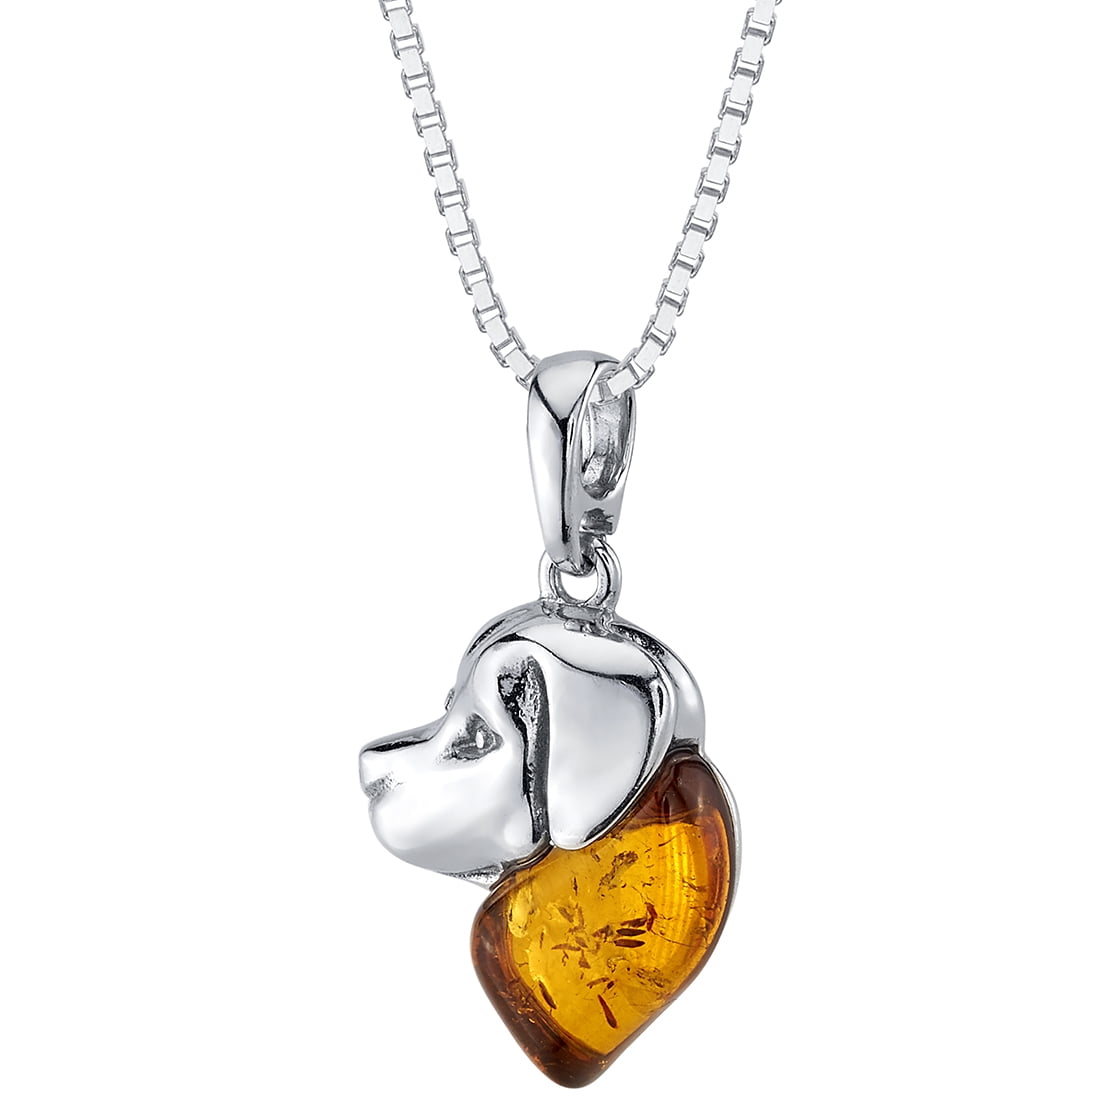 BALTIC AMBER STERLING SILVER 925 BULL ANIMAL HEAD PENDANT NECKLACE JEWELLERY